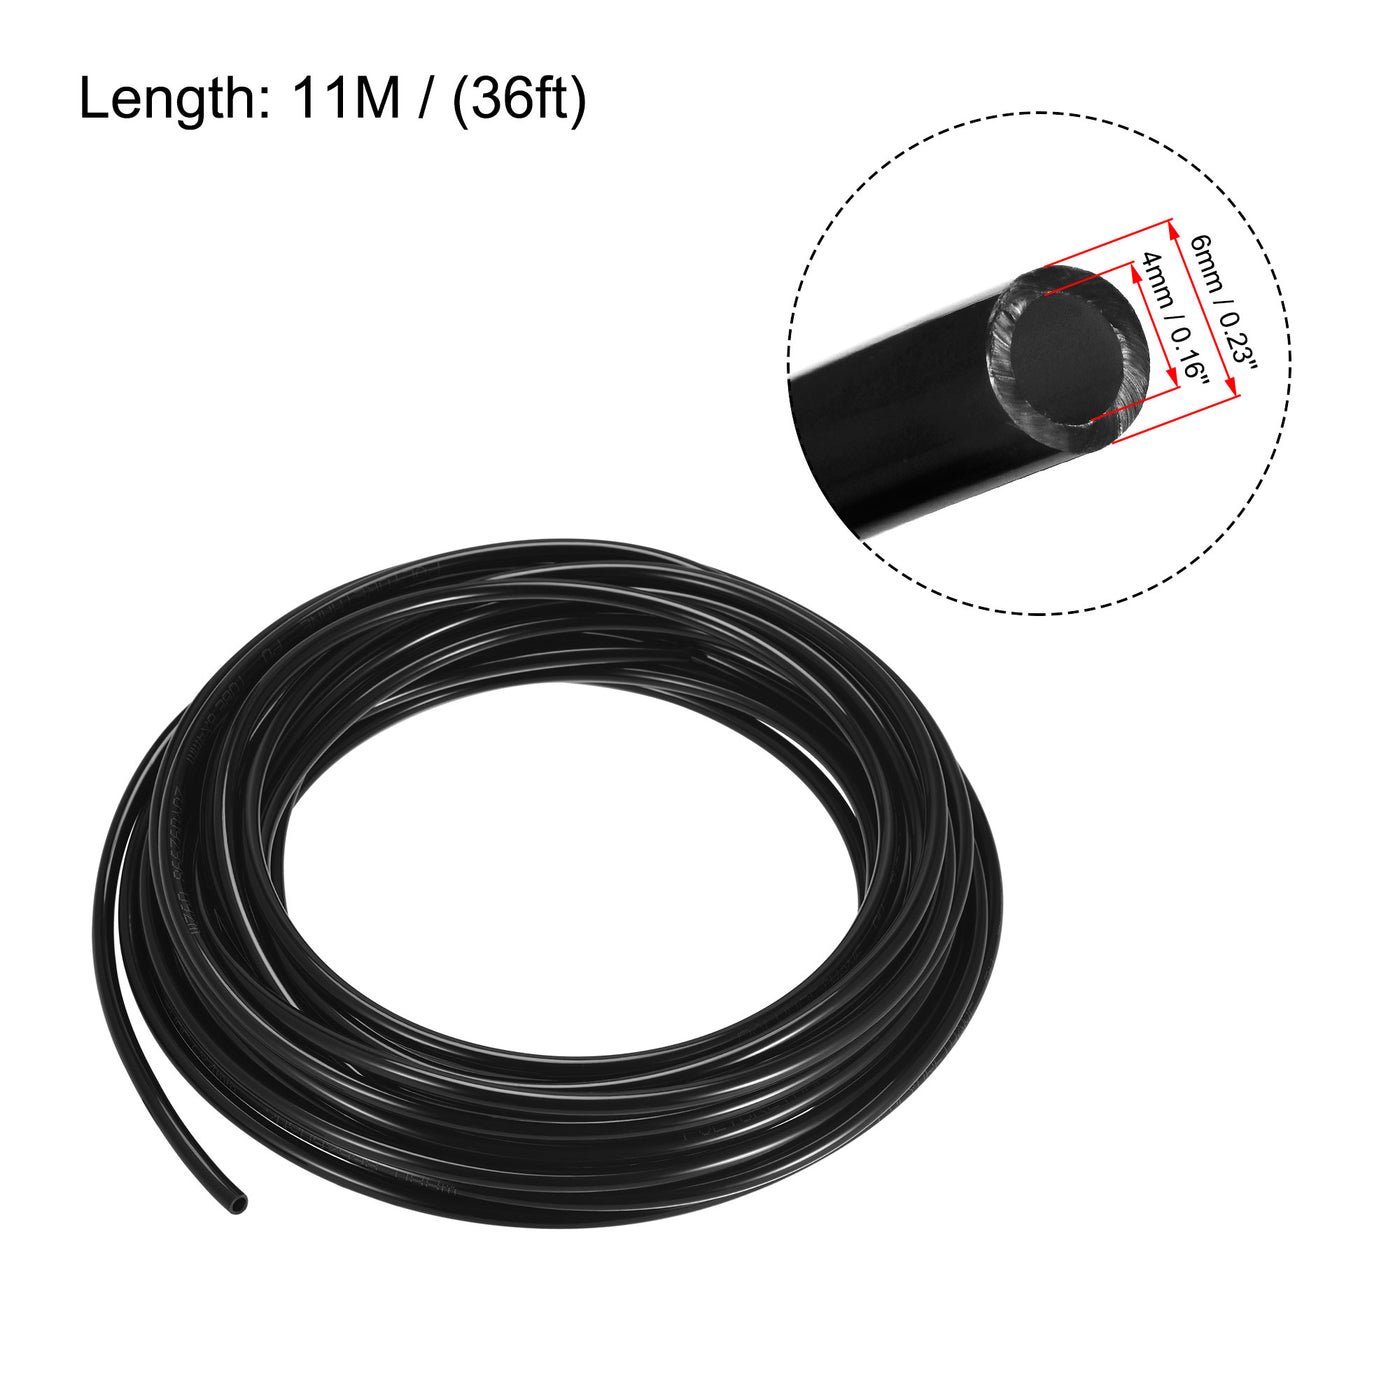 uxcell Uxcell Pneumatic Air Hose Tubing Air Compressor Tube 4mm/0.16''ID x 6mm/0.23''OD x 11m/36Ft Polyurethane Pipe Black